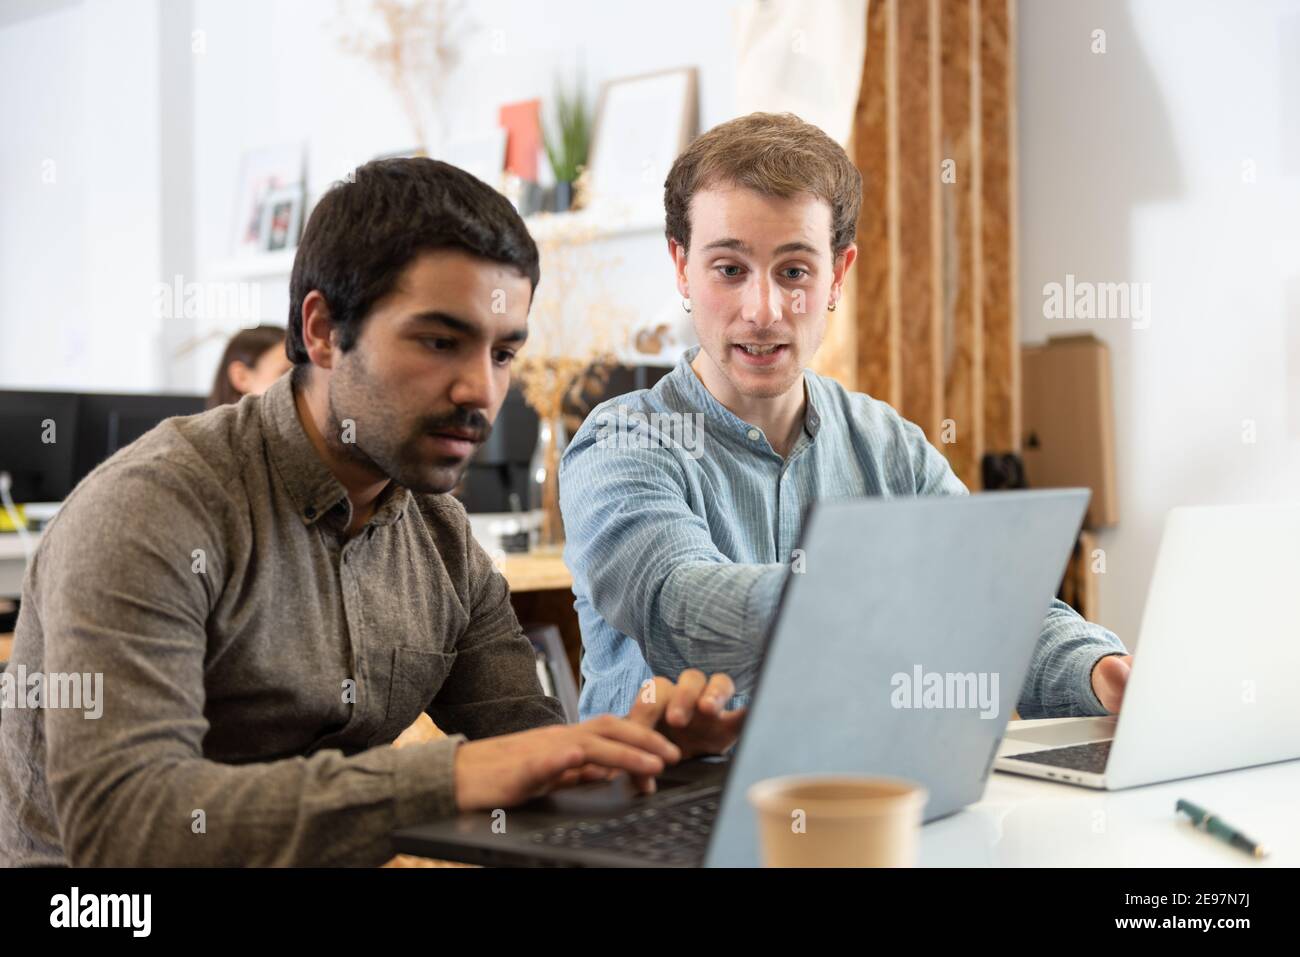 Coworkers helping each other while working on their laptops in the office. Stock Photo